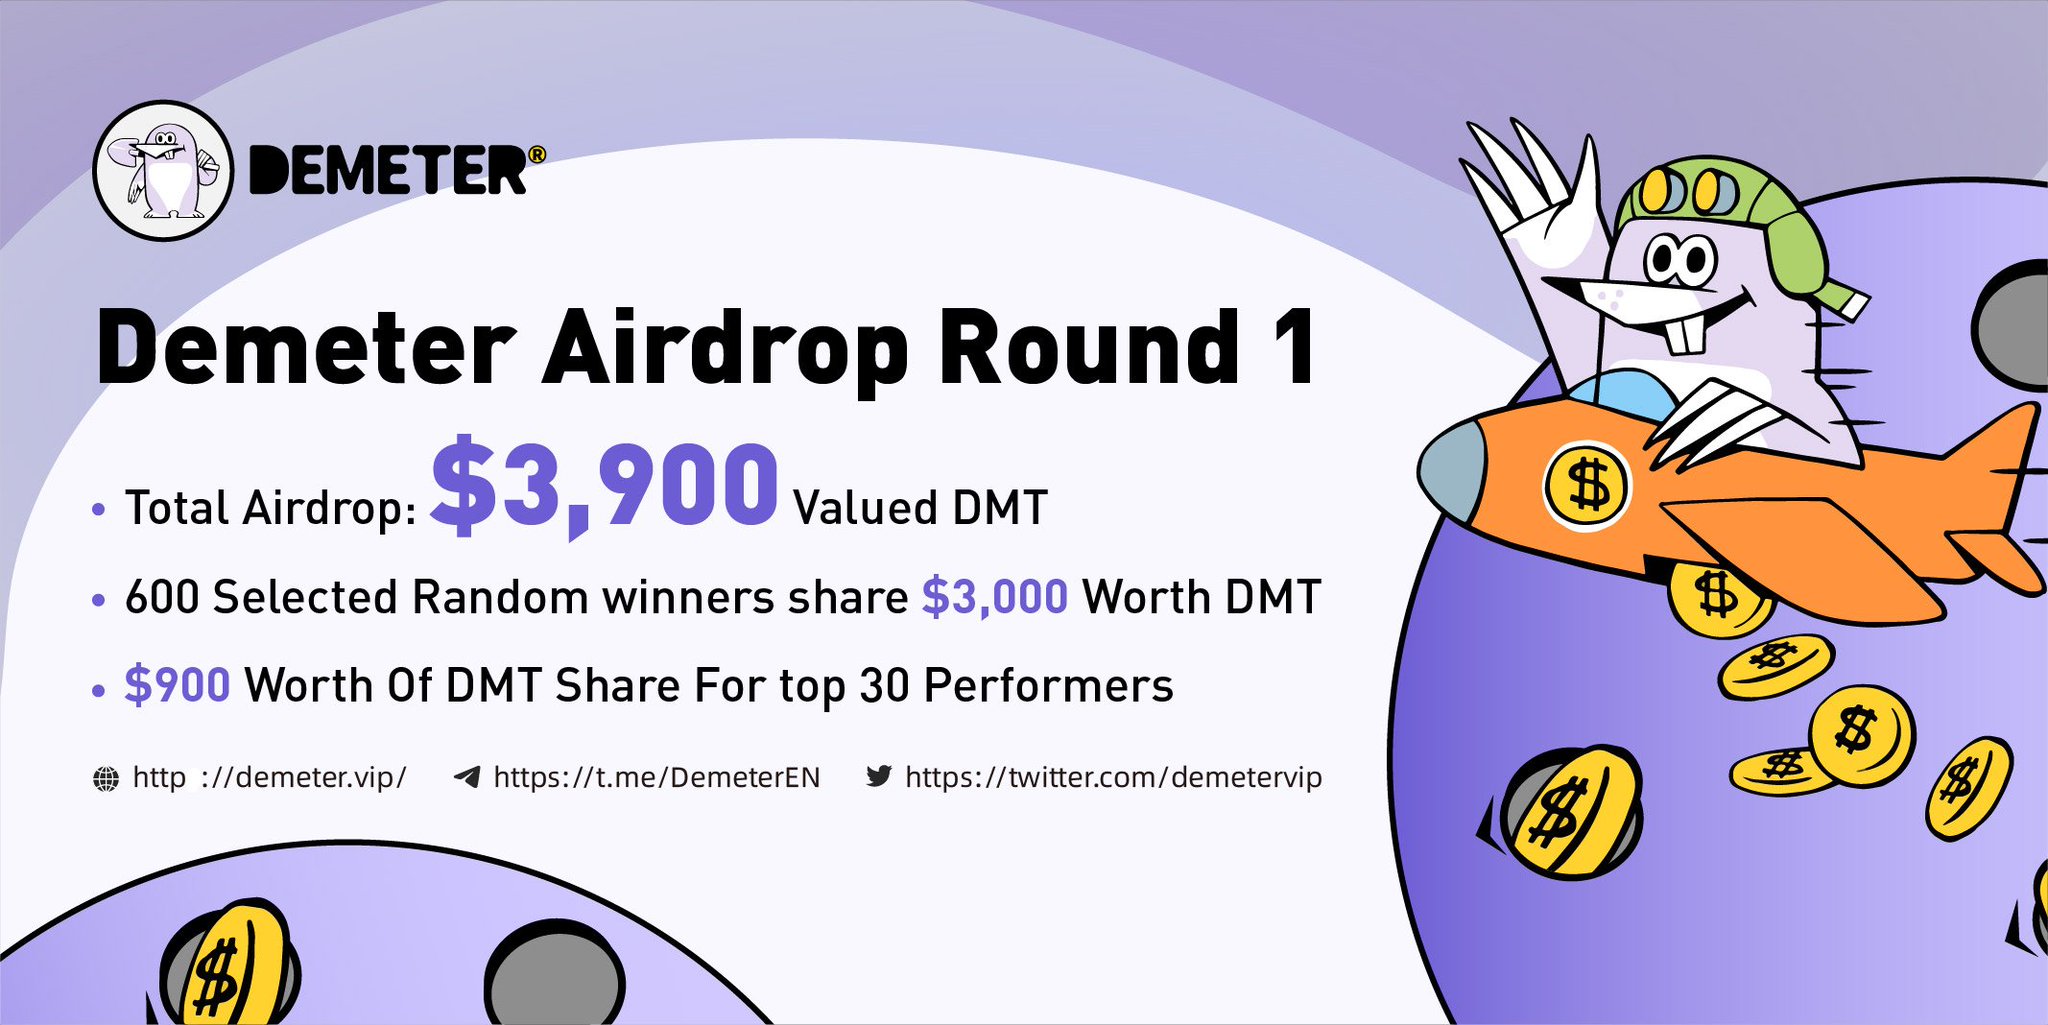 Demeter on Twitter: "💵Demeter Airdrop Round 1 is live !!! 🏮Welcome to # Demeter official Global Community 🚀Total Airdrop: $3,900 Valued $DMT  👨‍👧‍👧Join our airdrop bot here: https://t.co/r33cJyvab5…  https://t.co/a8sgfB6K2t"